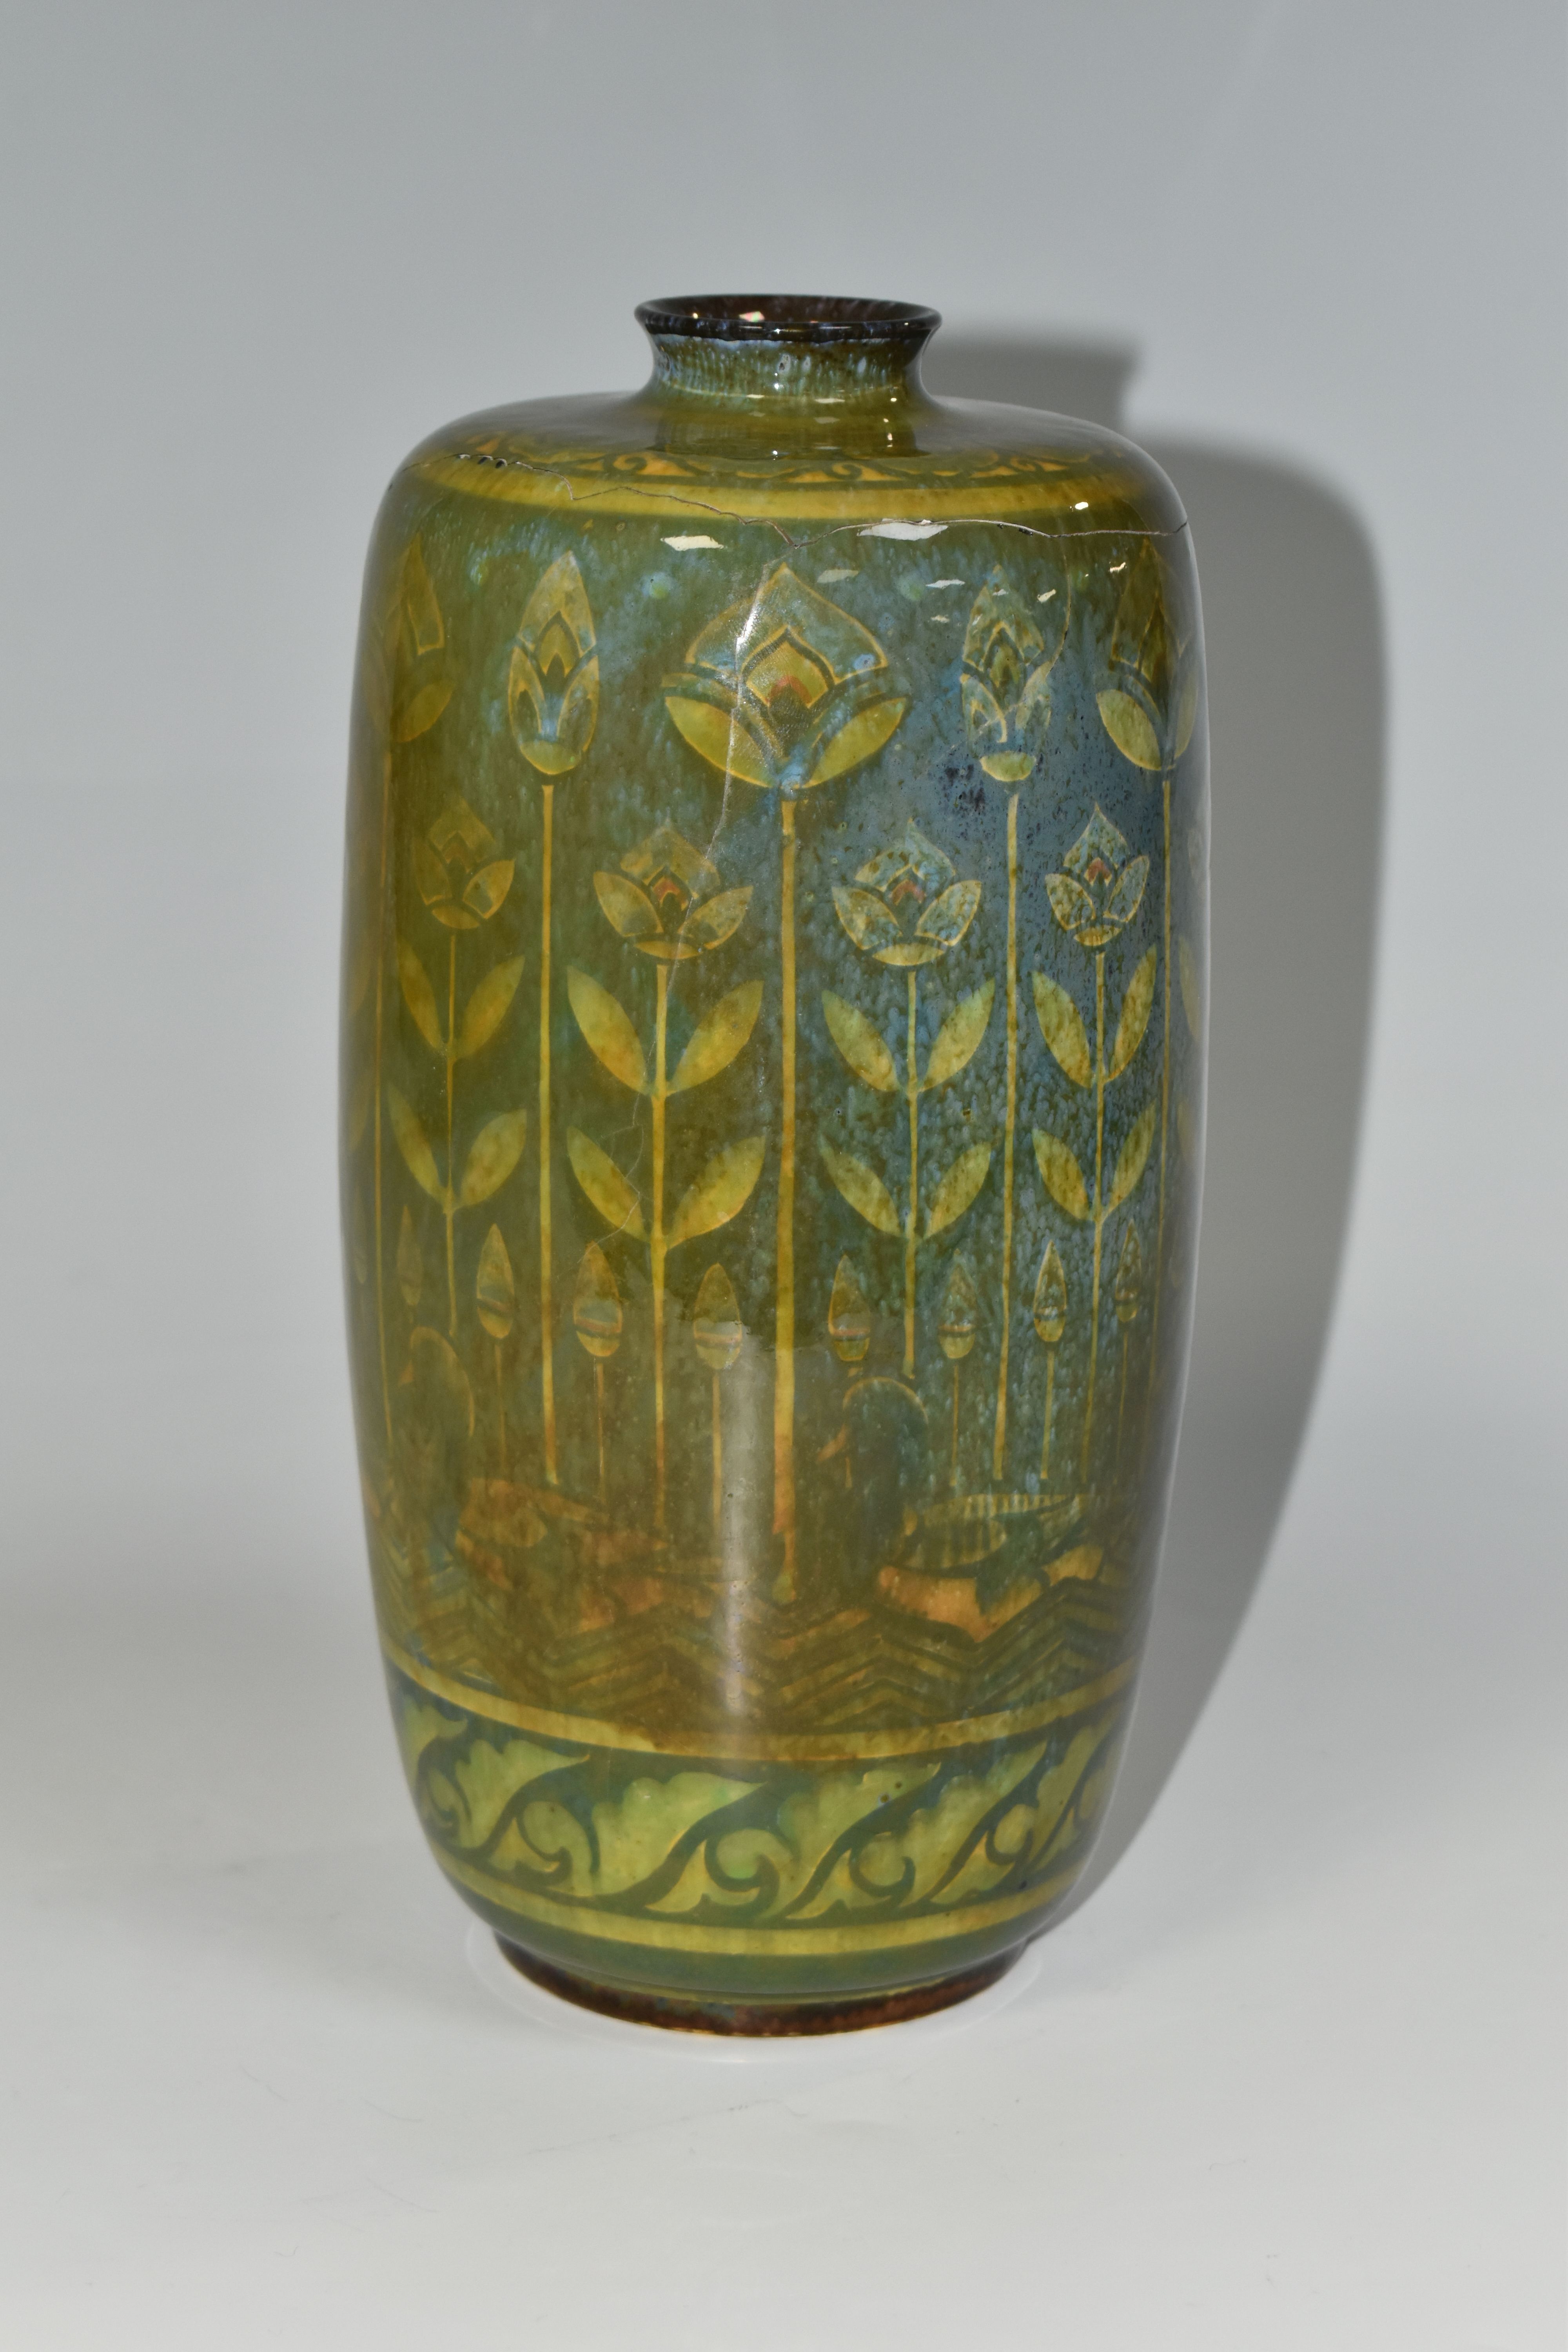 A PILKINGTON'S VASE, decorated with yellow stylized reeds and ducks on a mottled green ground, - Image 3 of 7